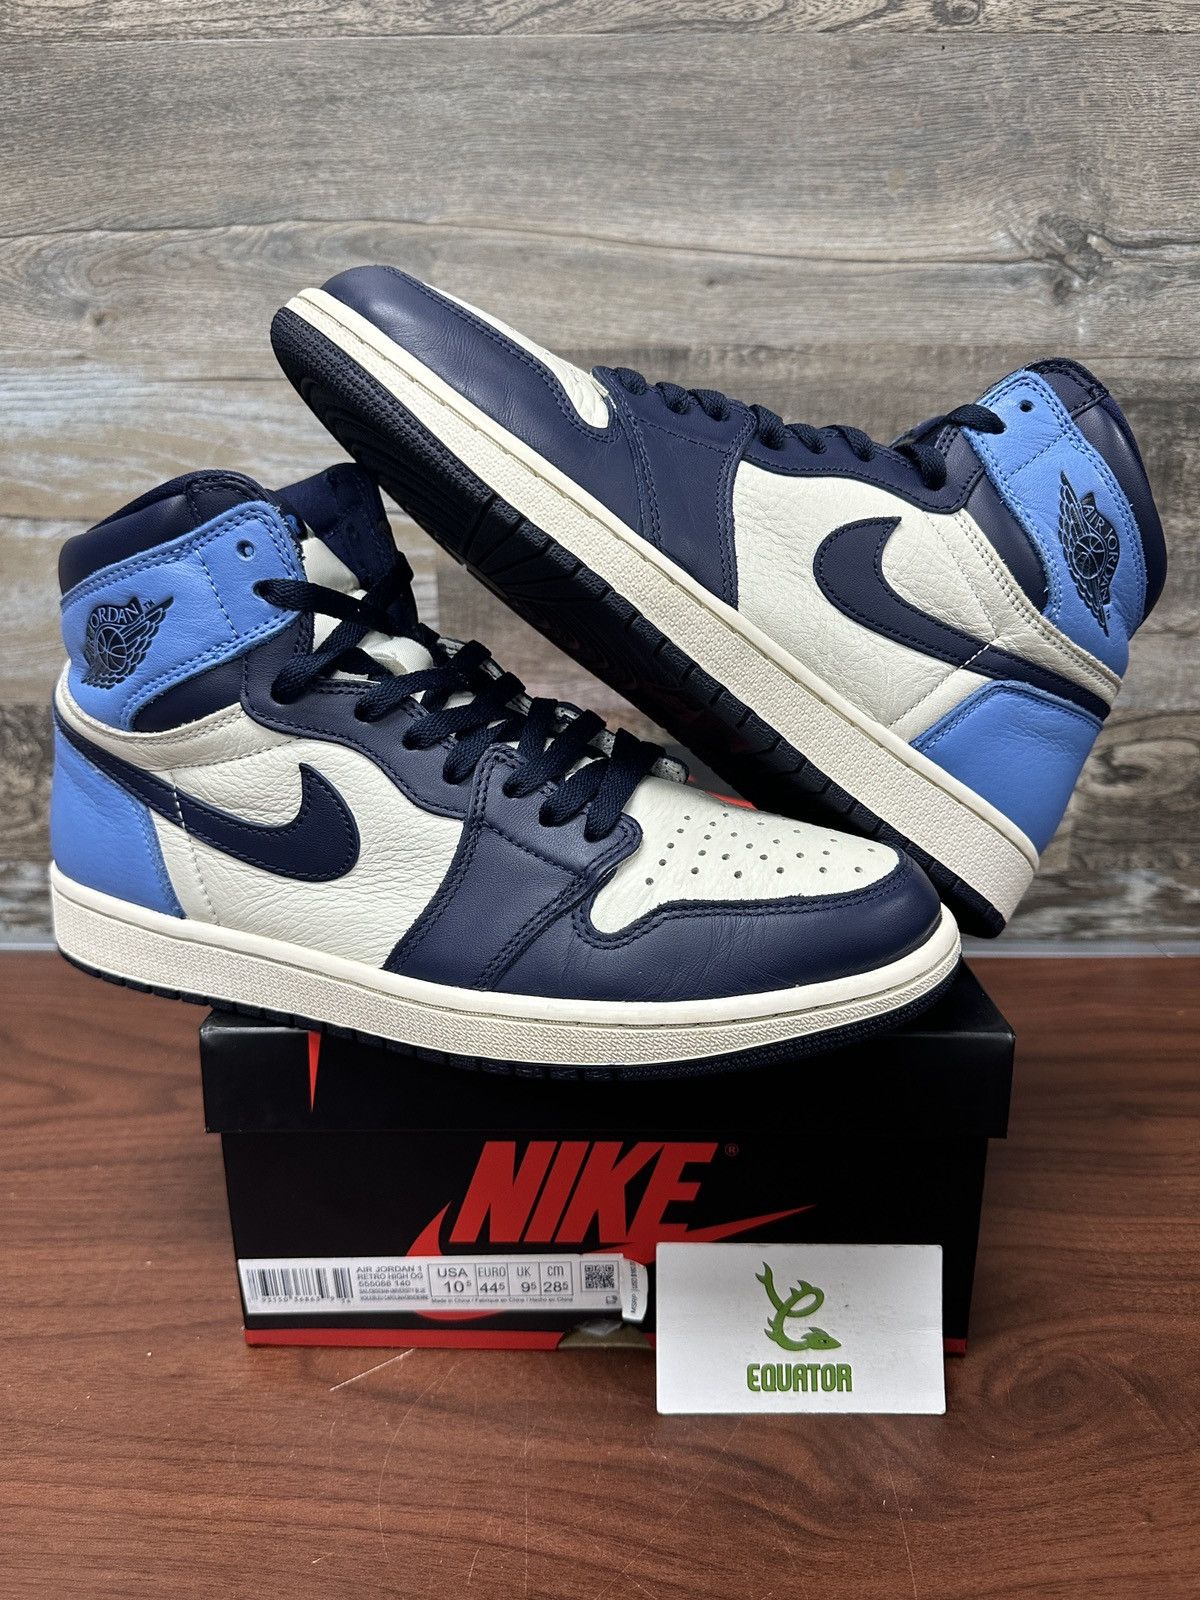 Nike Air Jordan 1 high UNC Obsidian Size 10.5 Used with box | Grailed